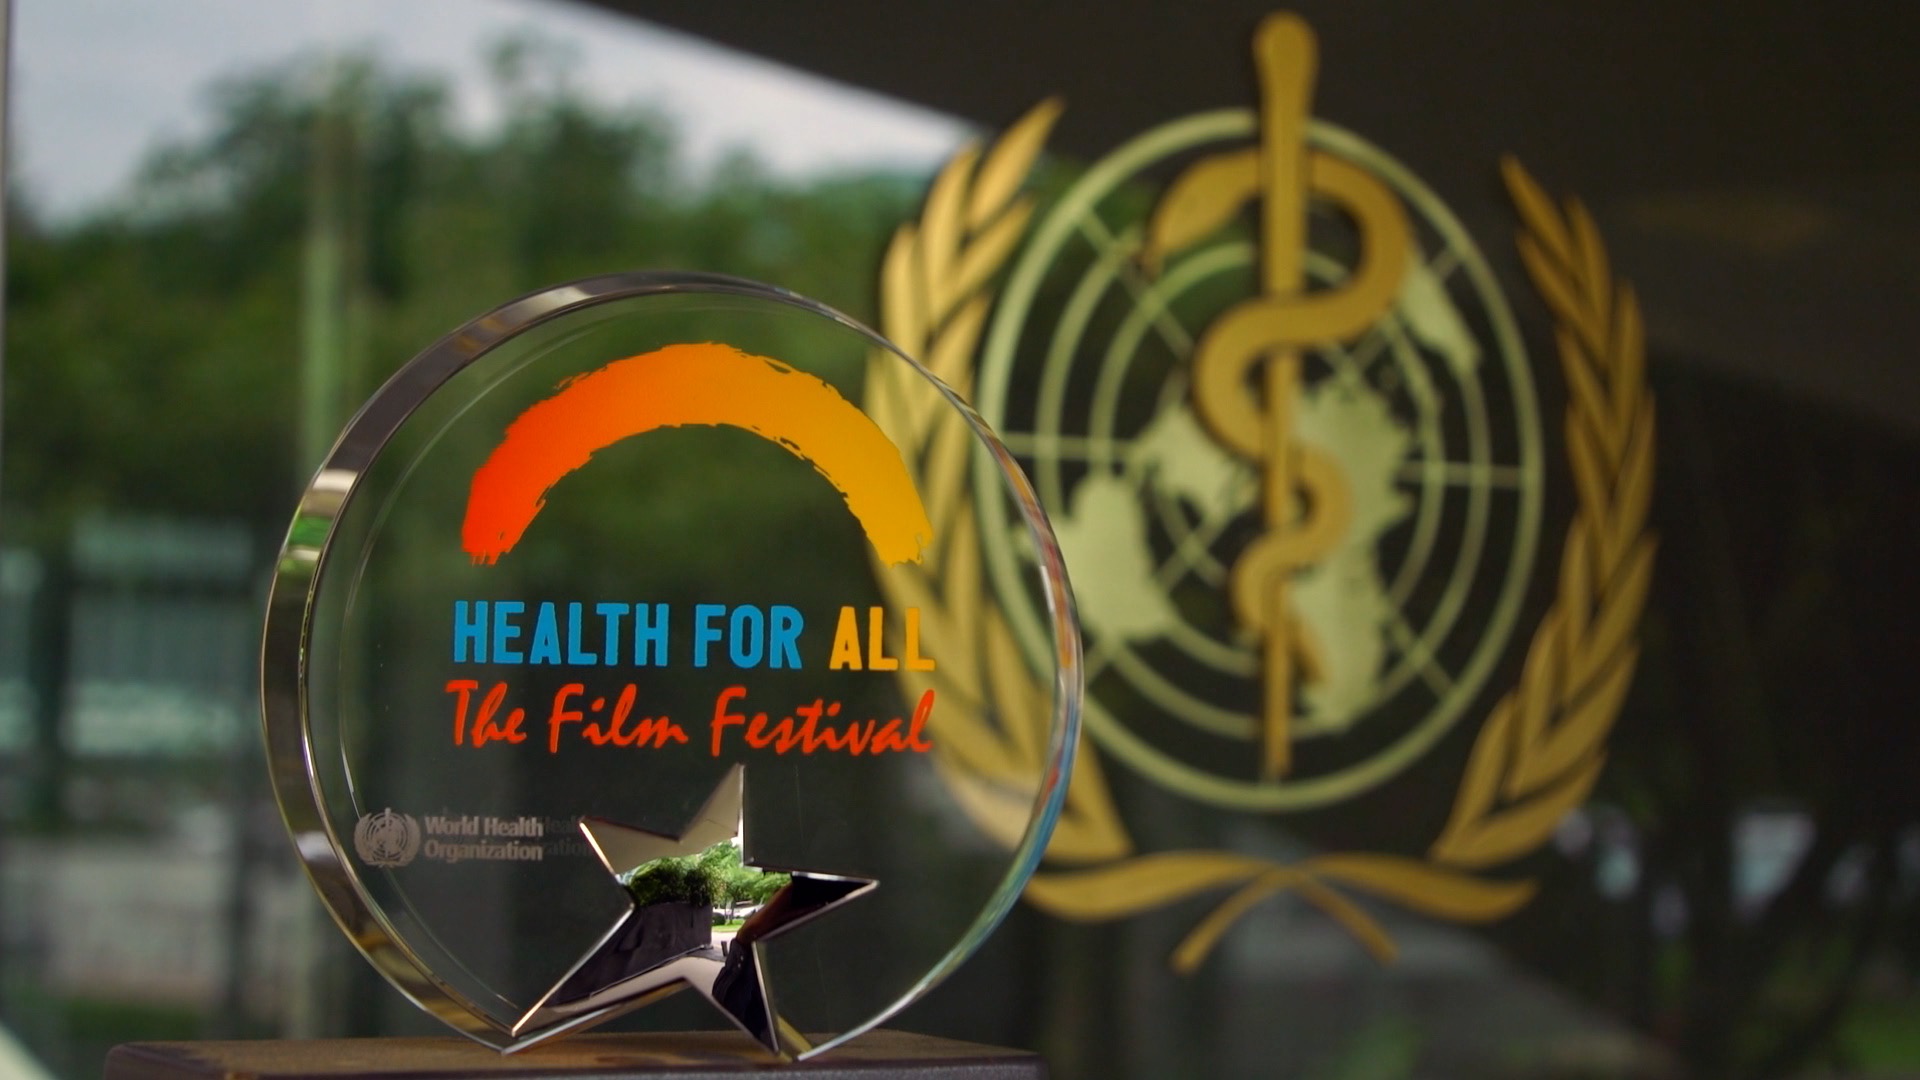 Trophy Health for All Film Festival